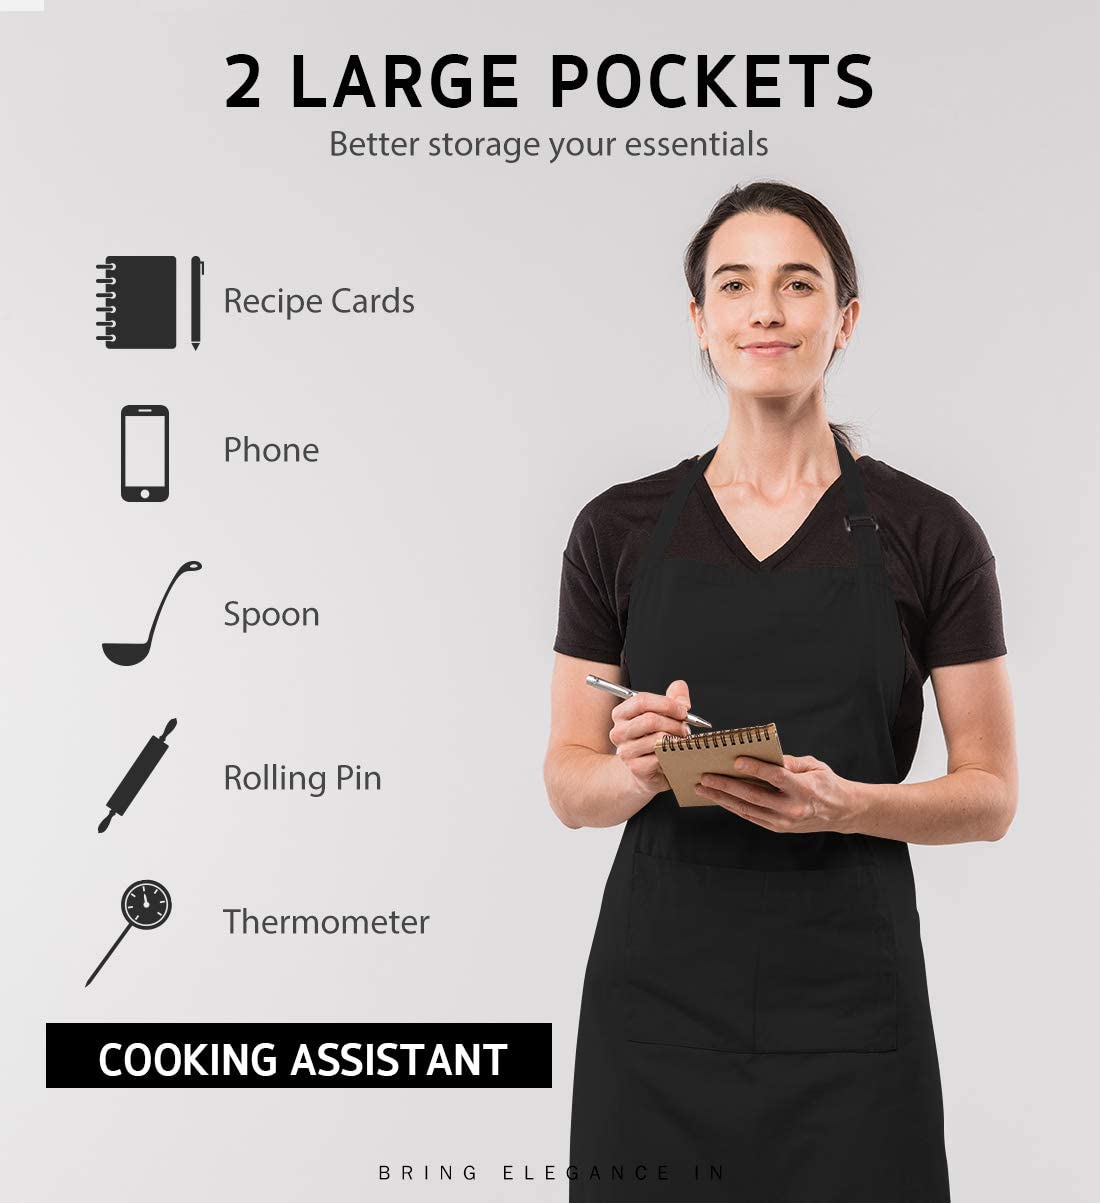 Machine washable, adjustable waterproof kitchen apron with pockets for men and women